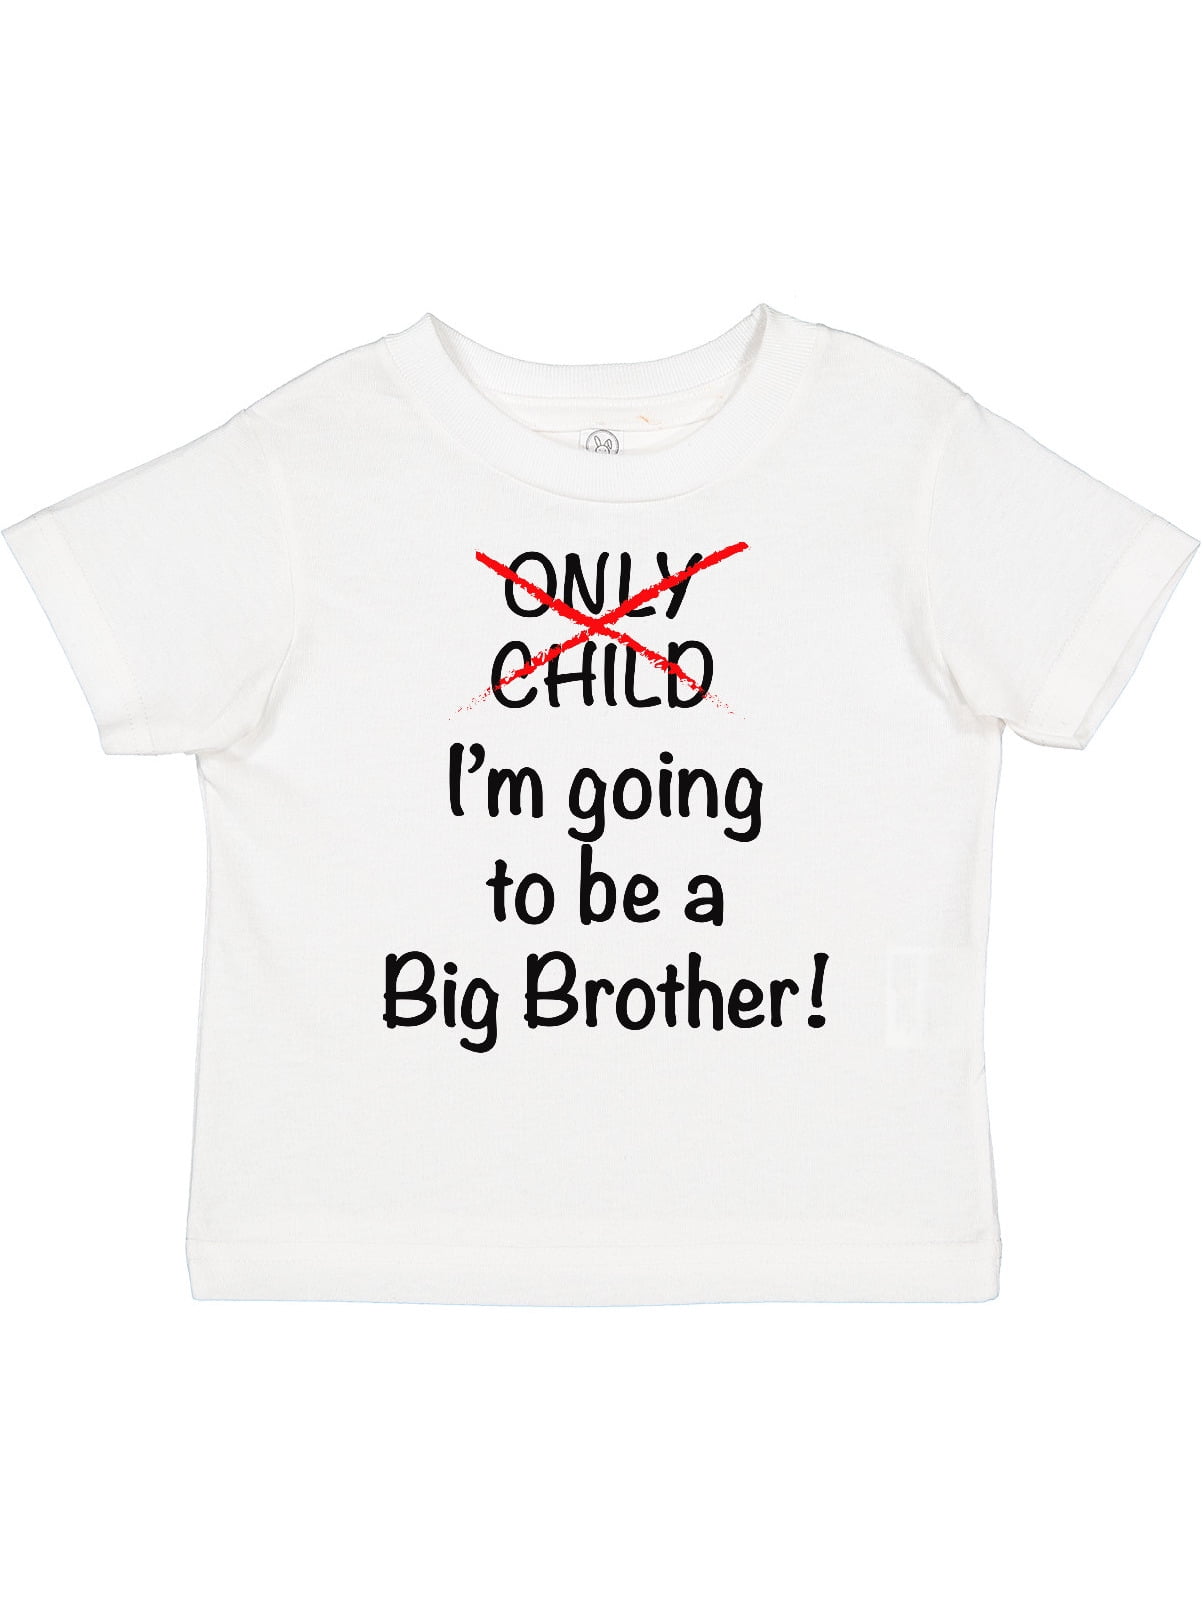 PERSONALISED IM GOING TO BE A BIG BROTHER T-SHIRT BOYS GIRLS TOP AGE SIZE KIDS 